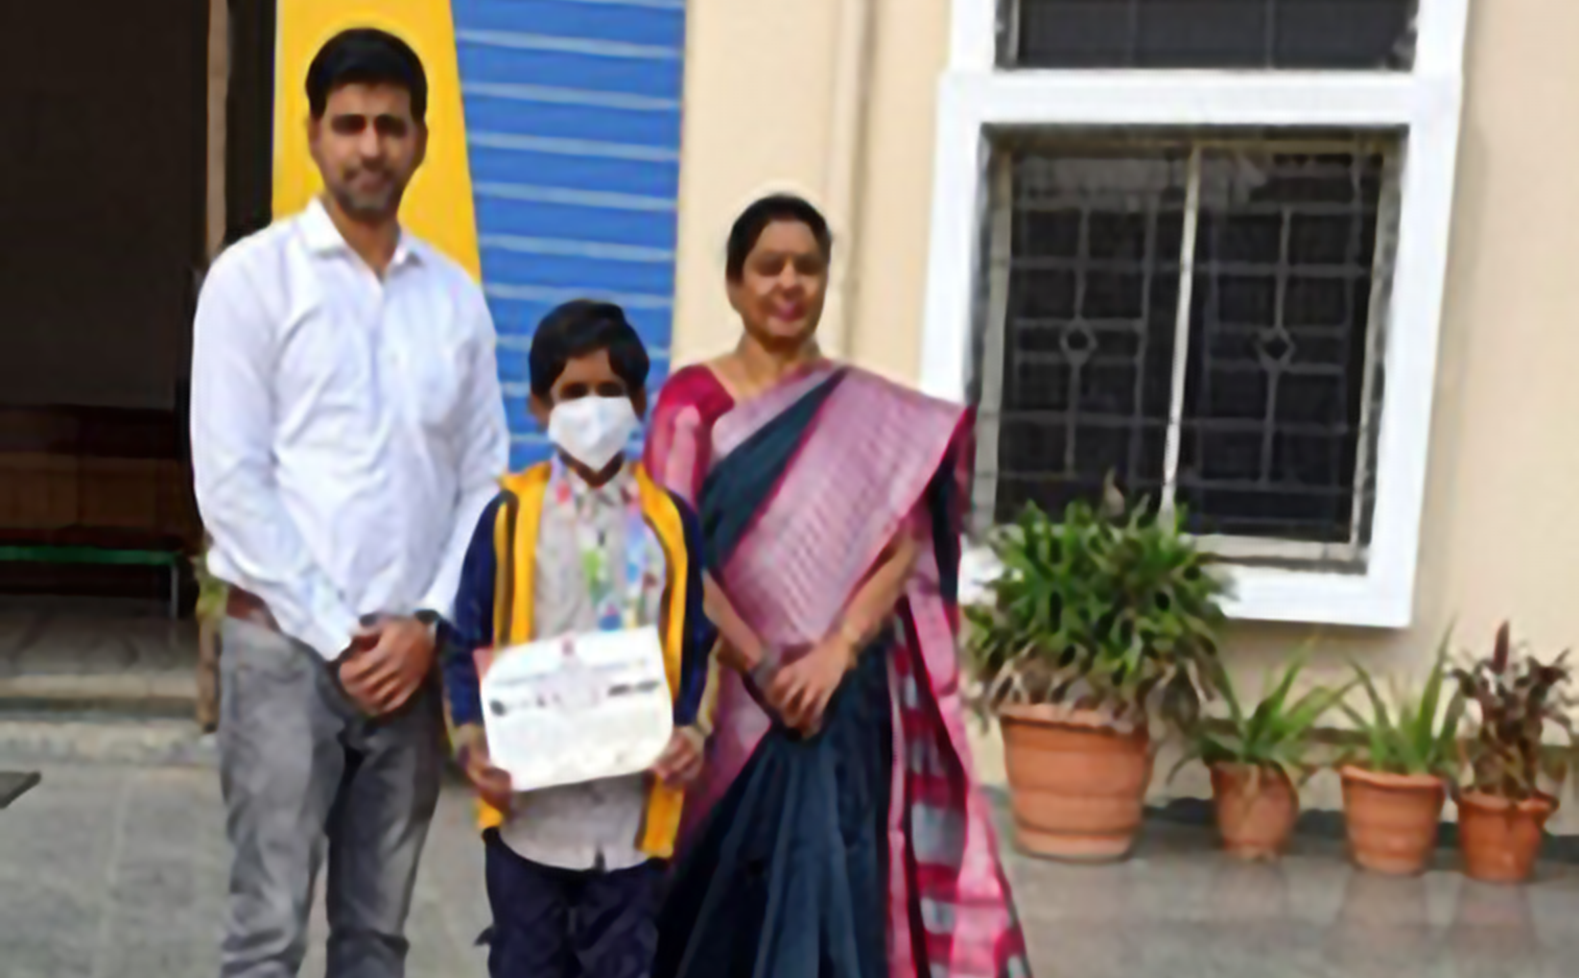 school student is holding certificate